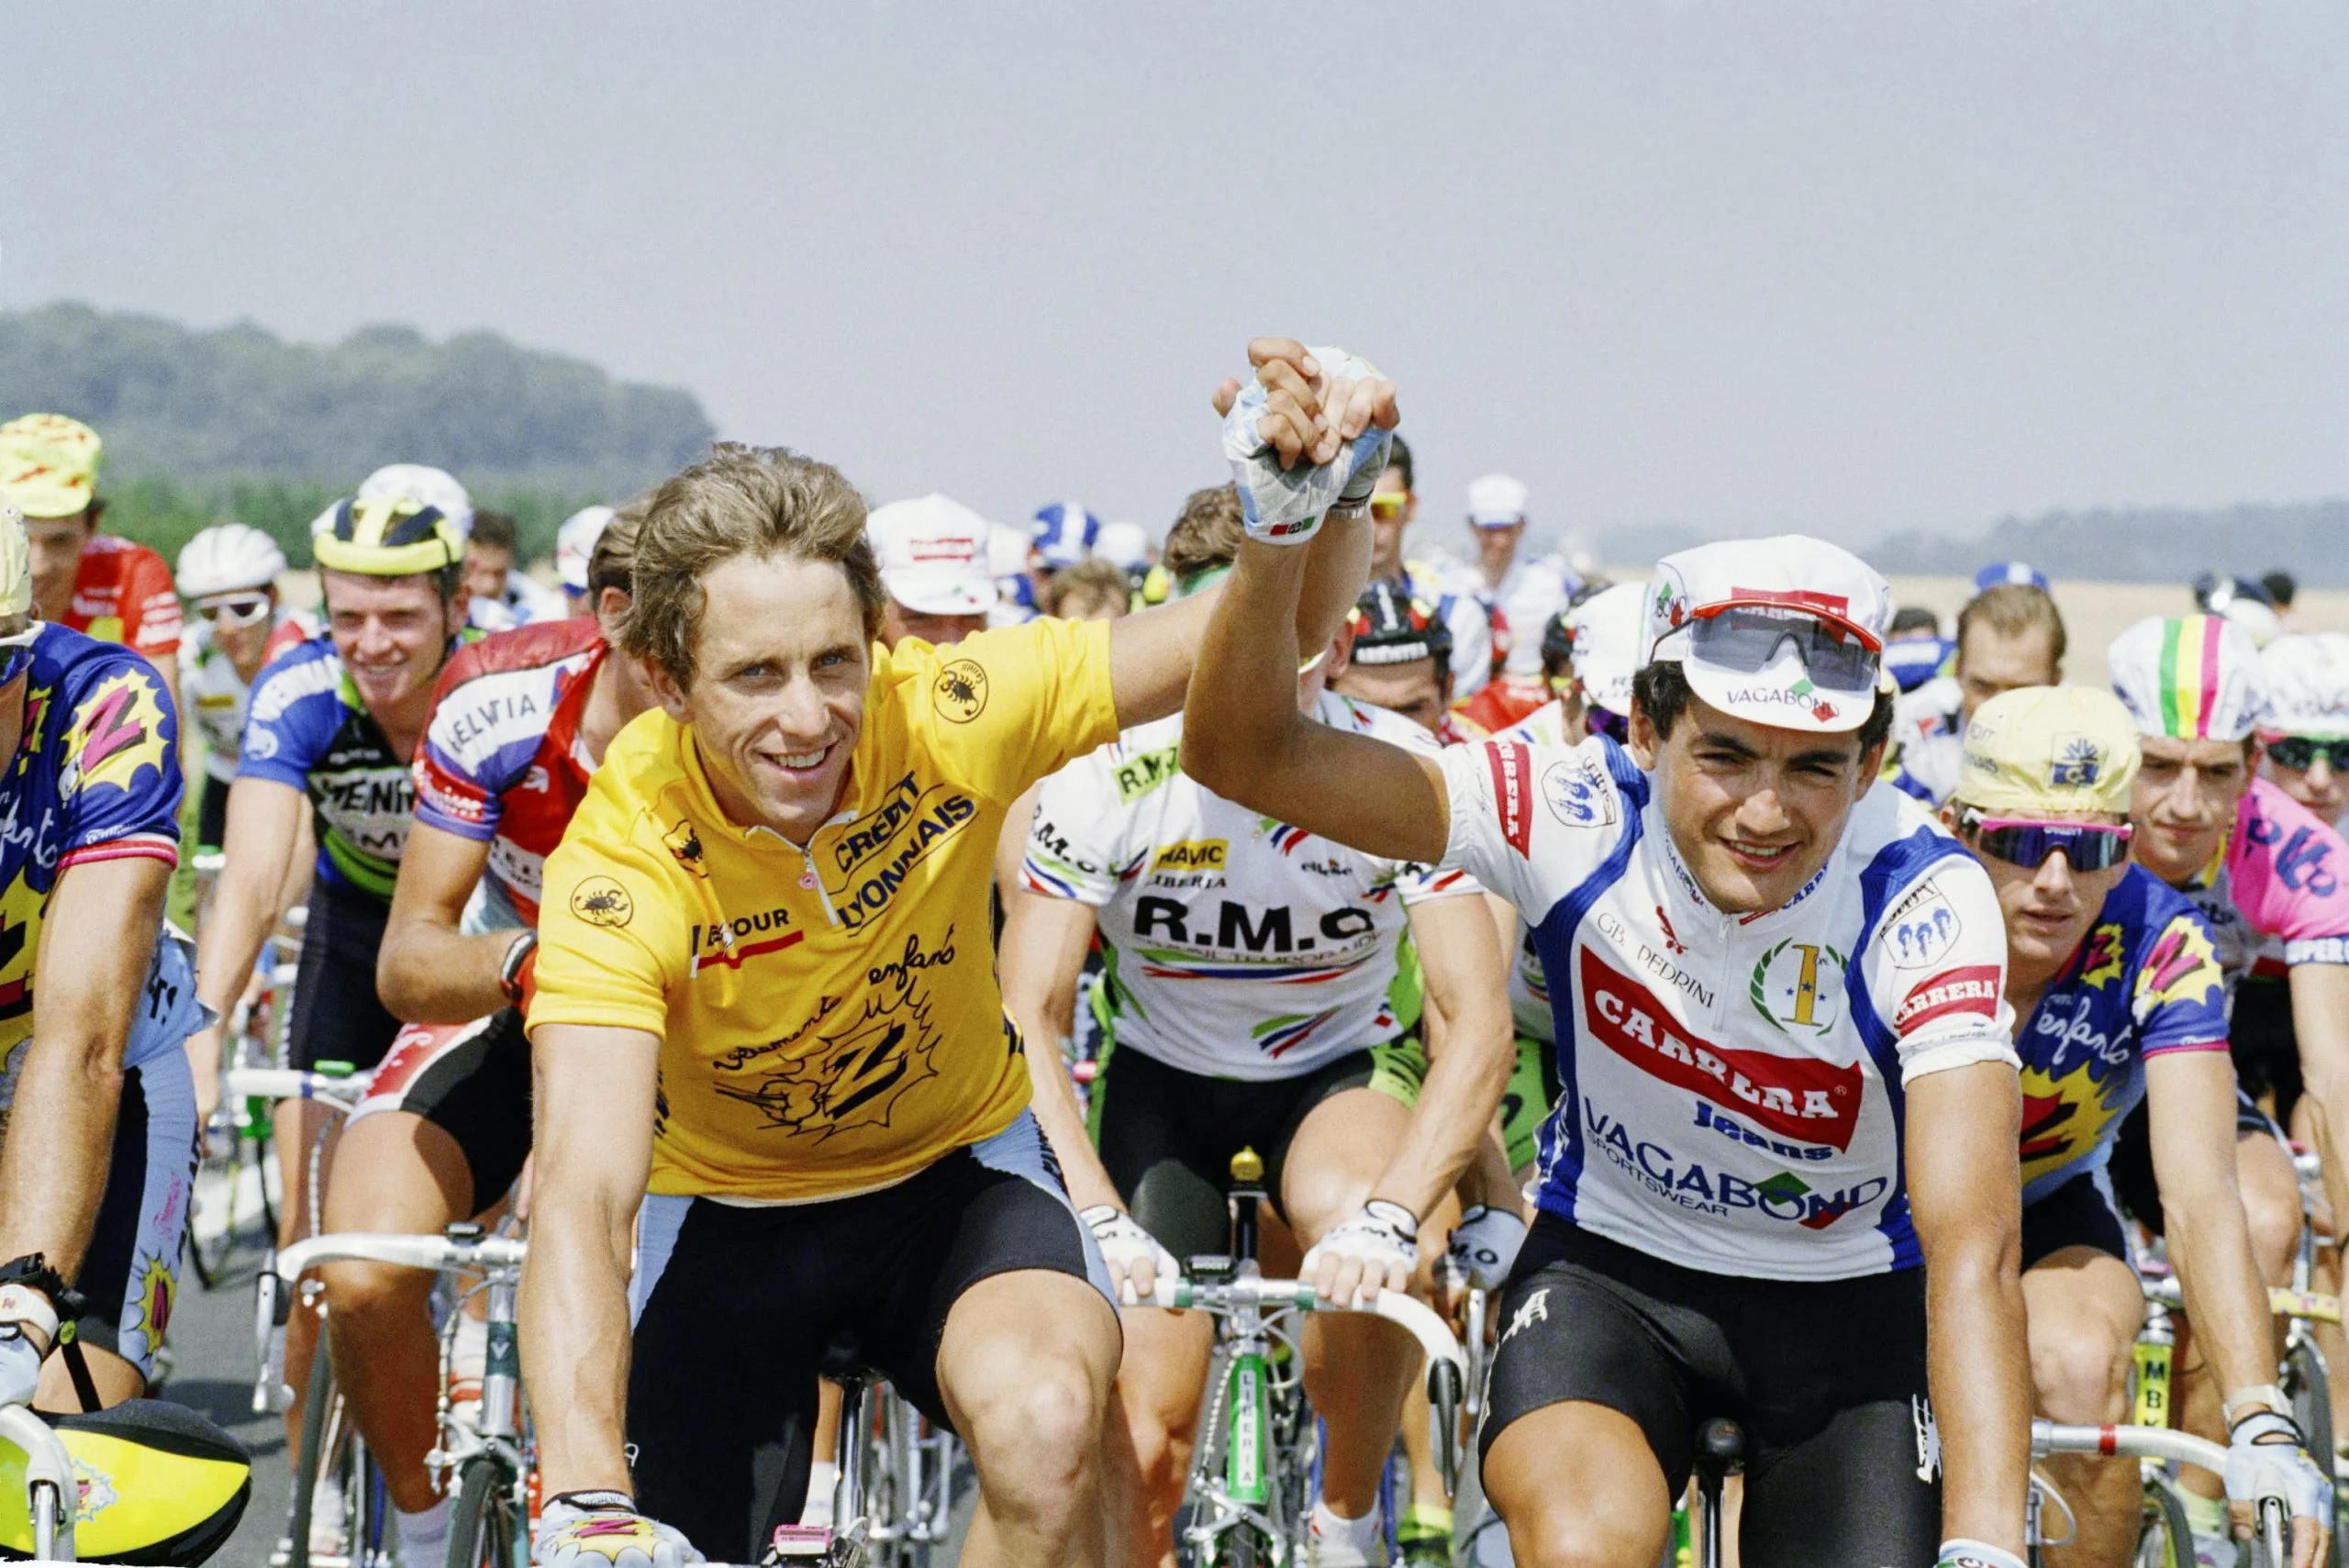 Defending champion Greg LeMond of the United States, left, grasps hands with Claudio Chiappucci of Italy going into the final stage of the Tour de France, Sunday, July 22, 1990, Paris, France. LeMond won his third Tour de France Sunday and Chiappucci finished second. (AP Photo/Laurent Rebours)